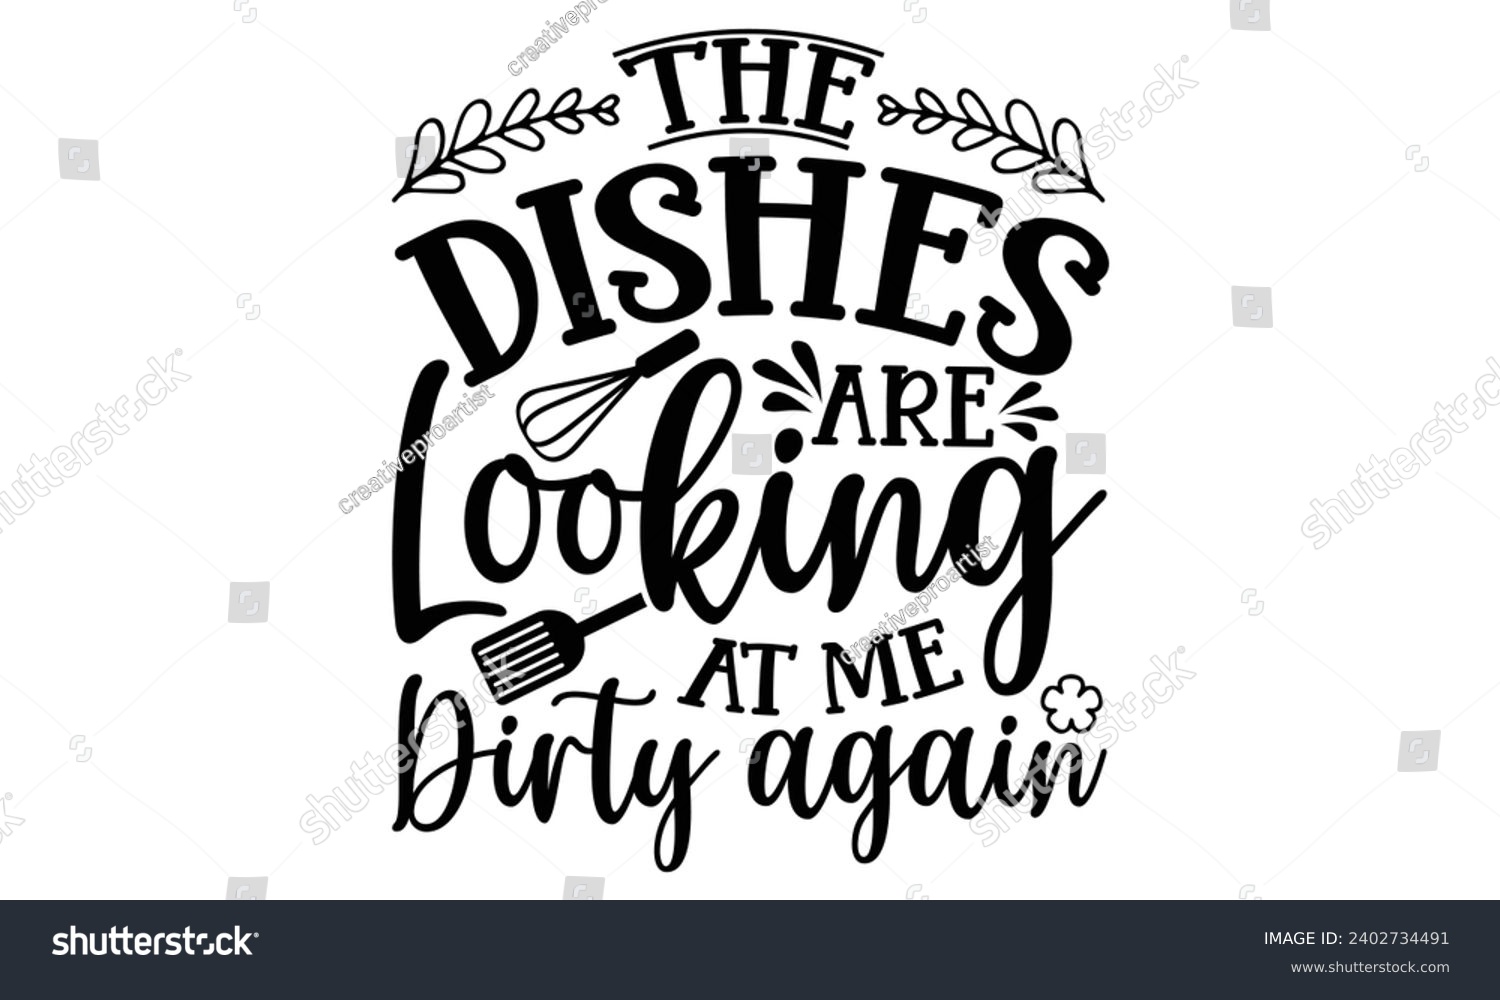 SVG of The Dishes Are Looking At Me Dirty Again- Baking t- shirt design, This illustration can be used as a print on Template bags, stationary or as a poster, Isolated on white background. svg